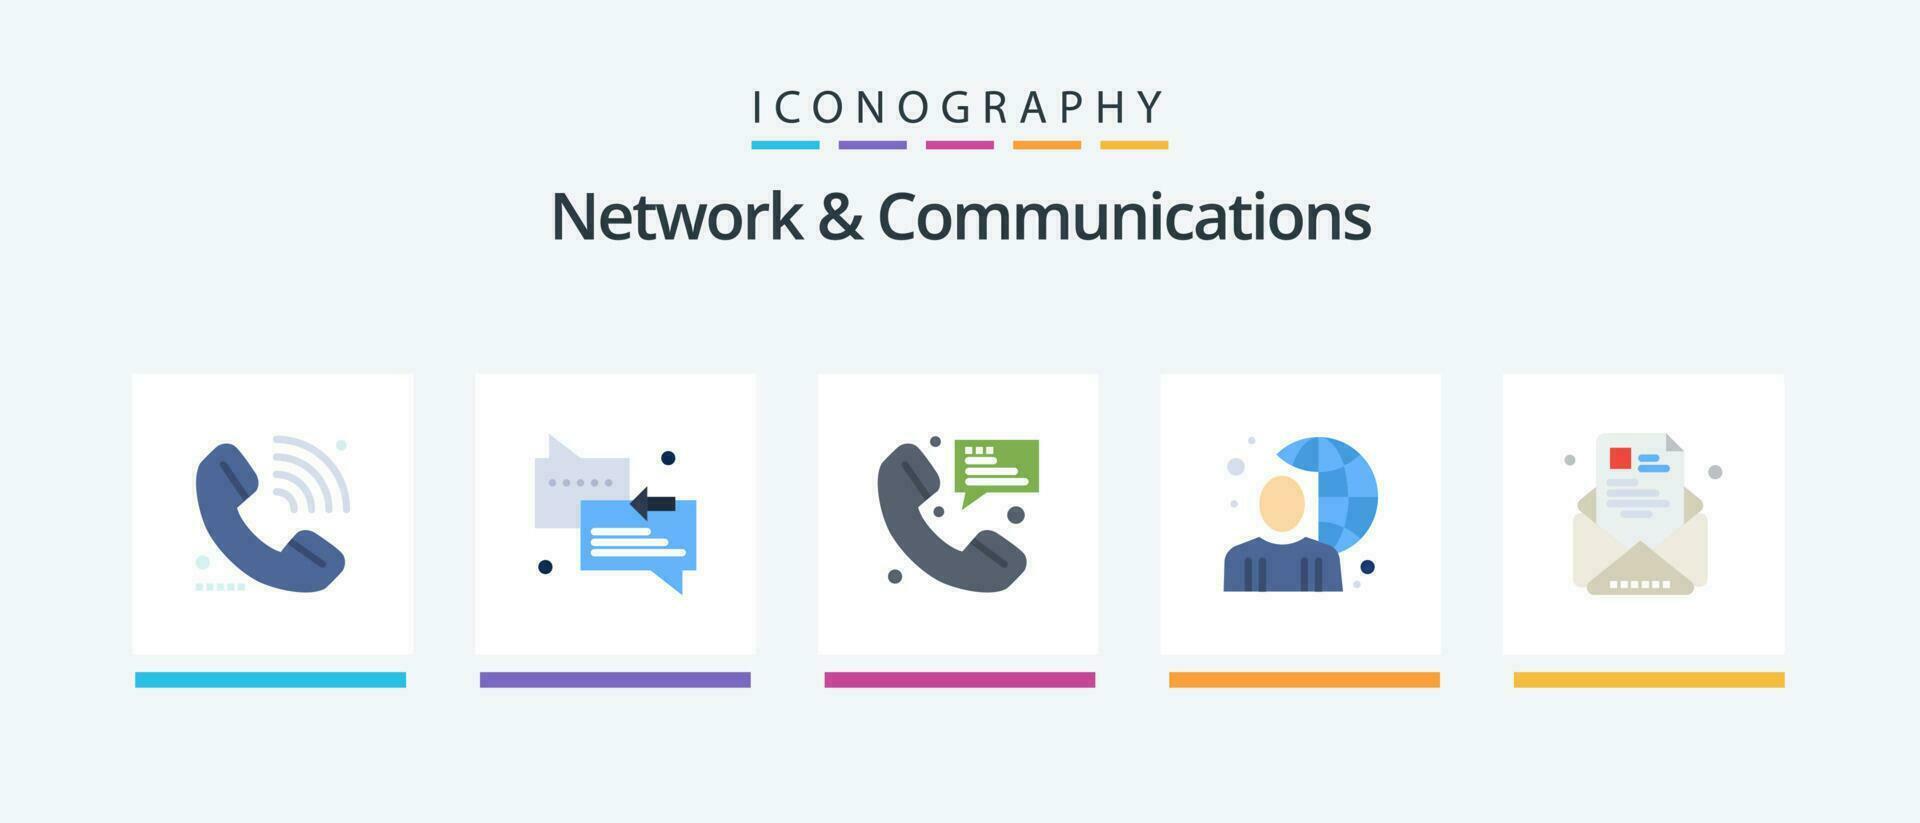 Network And Communications Flat 5 Icon Pack Including male. online. arrow. user. communication. Creative Icons Design vector